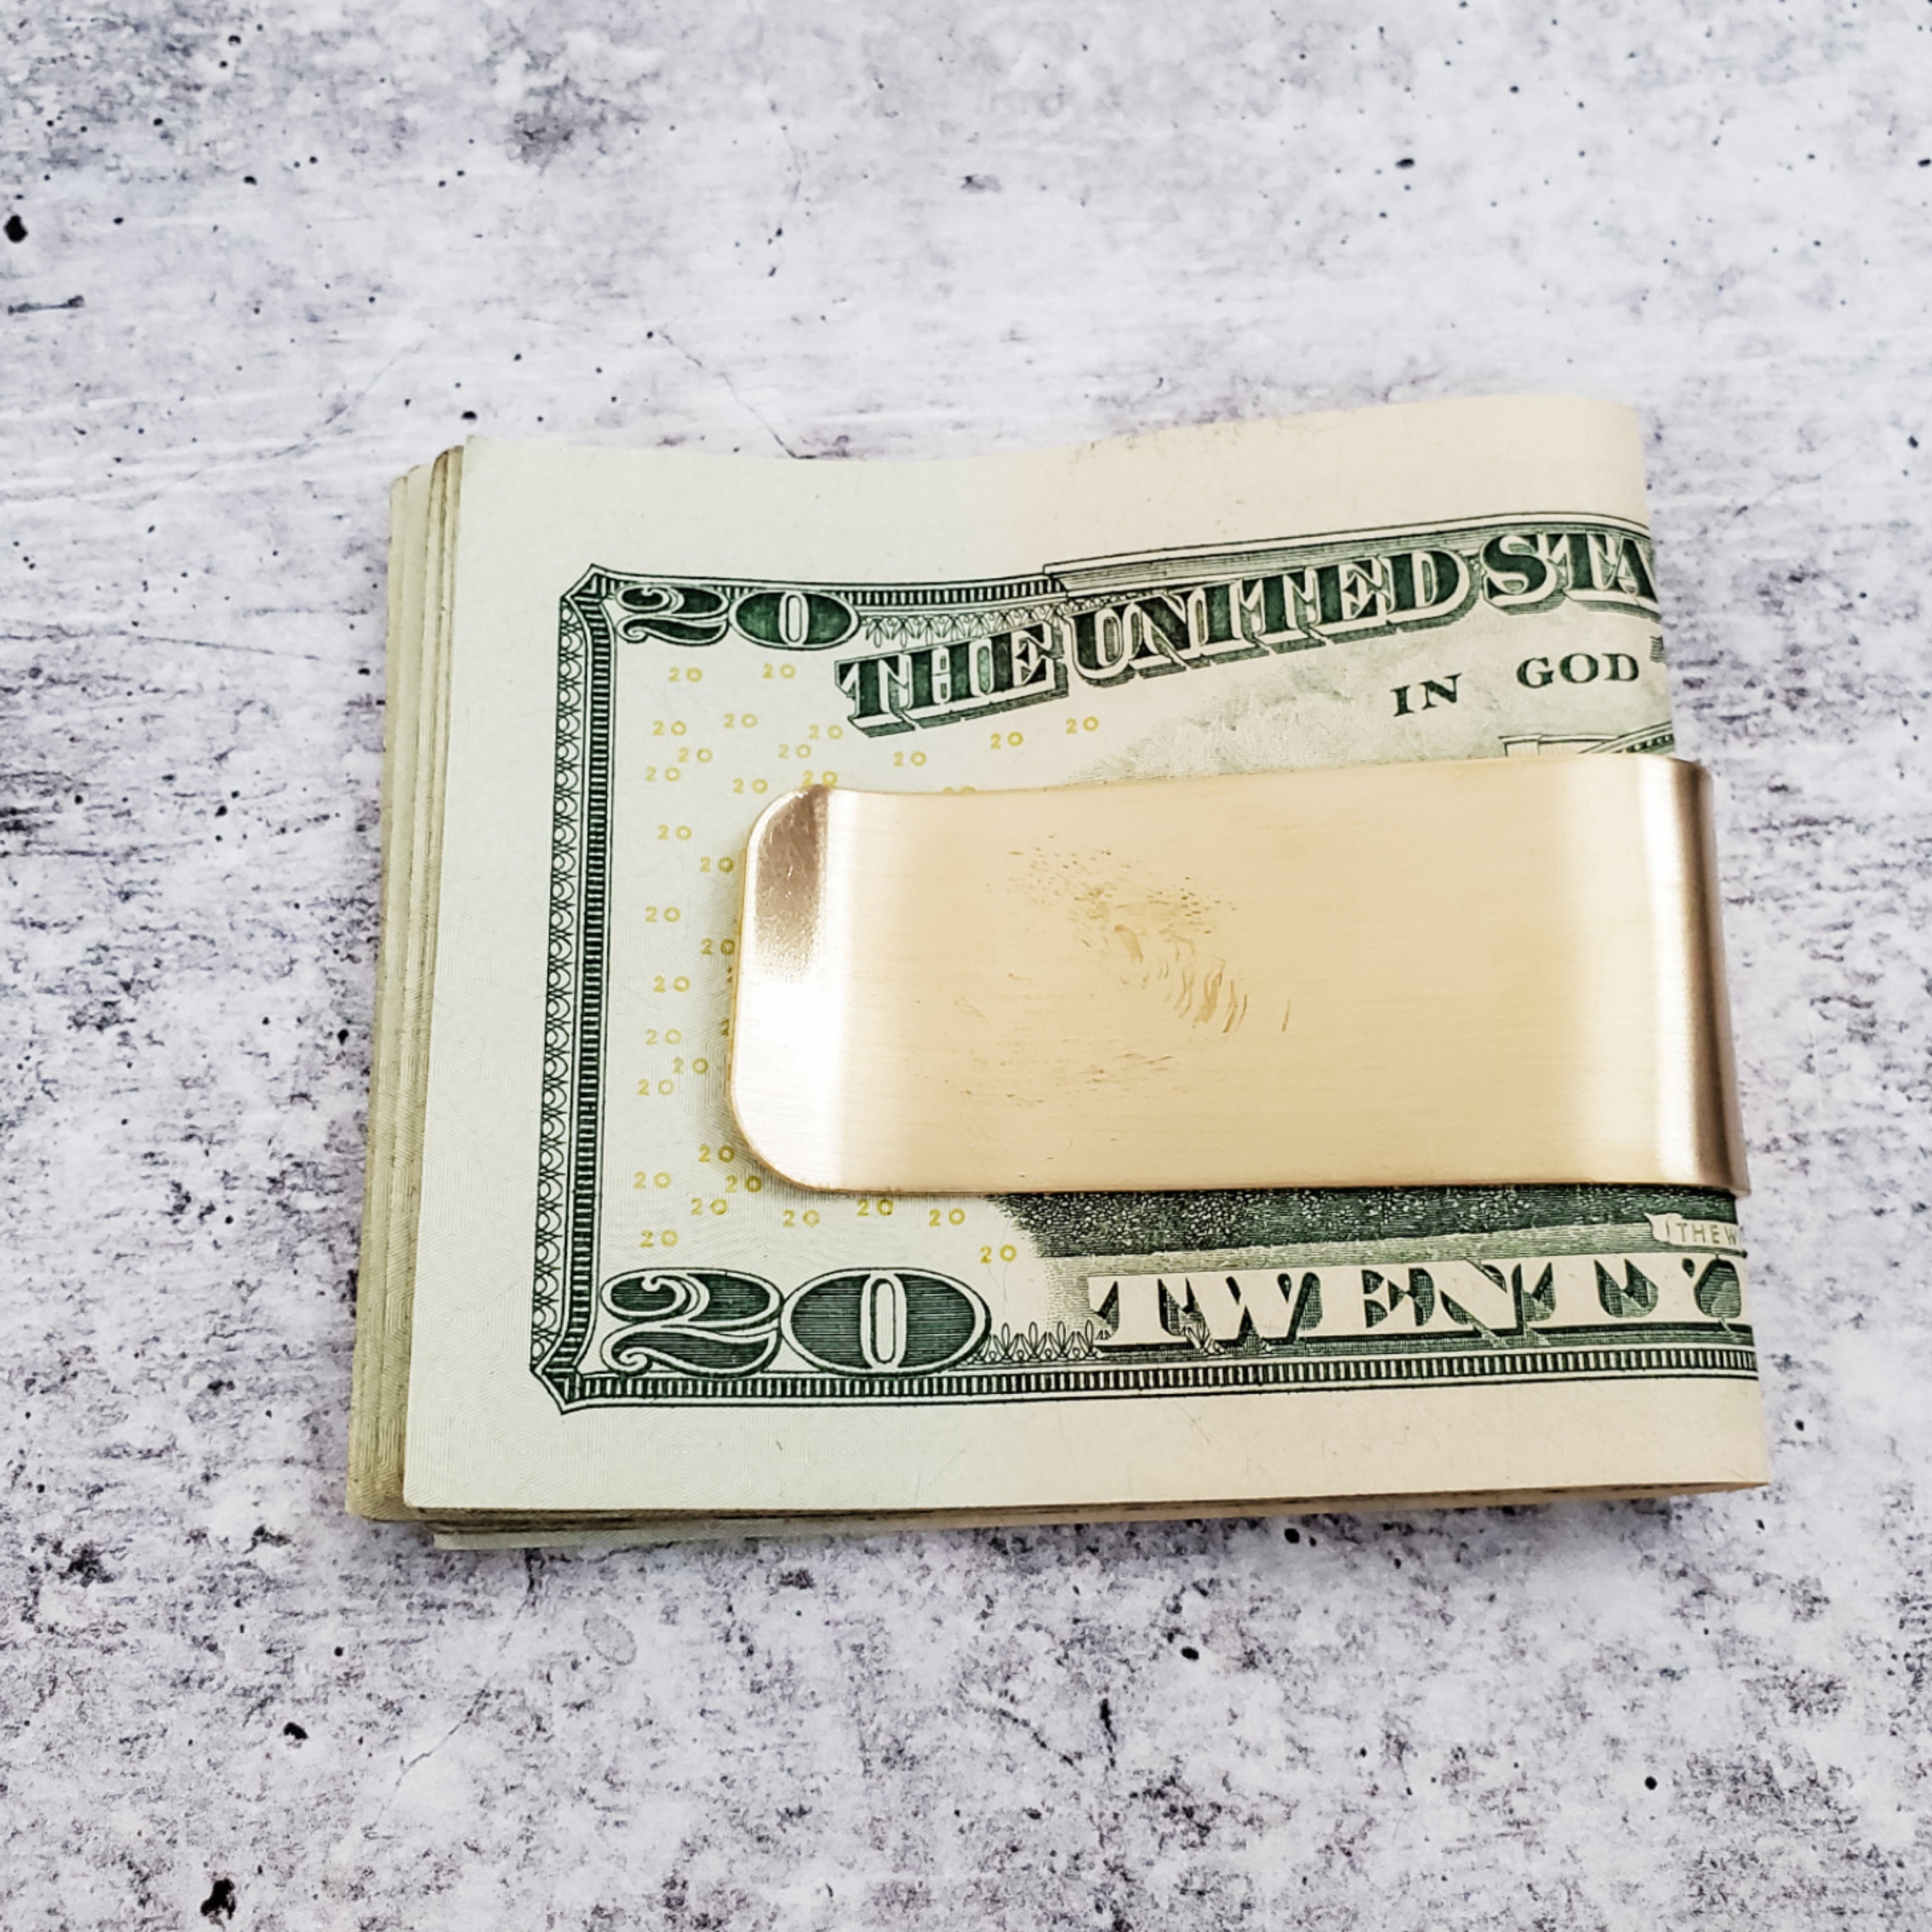 RAD DAD Money Clip - Custom Money Clip - Personalized Father's Day Gift - First Time Dad Gift - Custom Minimalist Wallet for Dads - Cool Dad